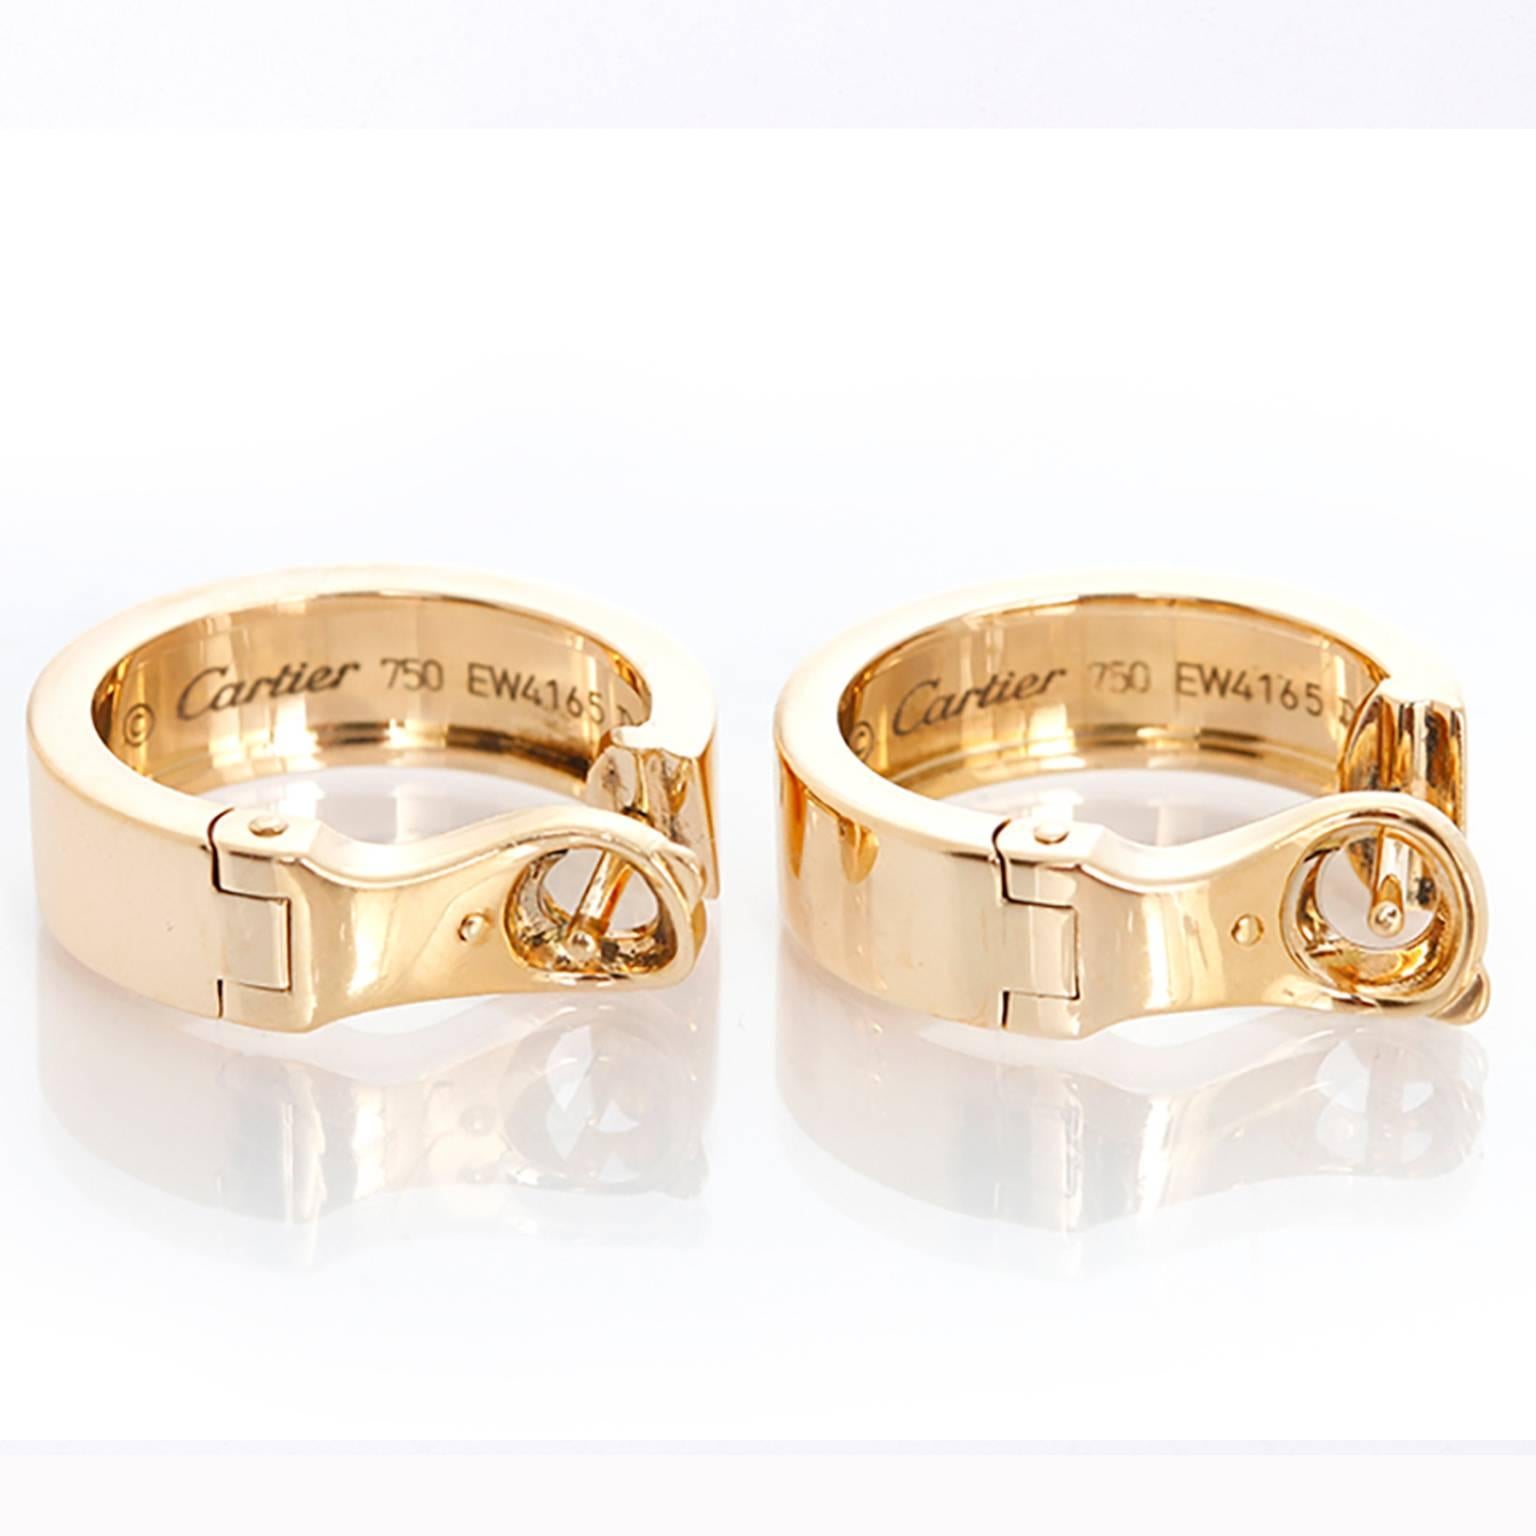 Cartier LOVE 18k Yellow Gold Hoop Earrings -  These Cartier LOVE earrings are timeless and are perfect for any look! The earrings are stamped Cartier, 750 and EW4165. The earrings measure apx. 1/4-inch in width and apx. 3/4 -inch in length.  Total